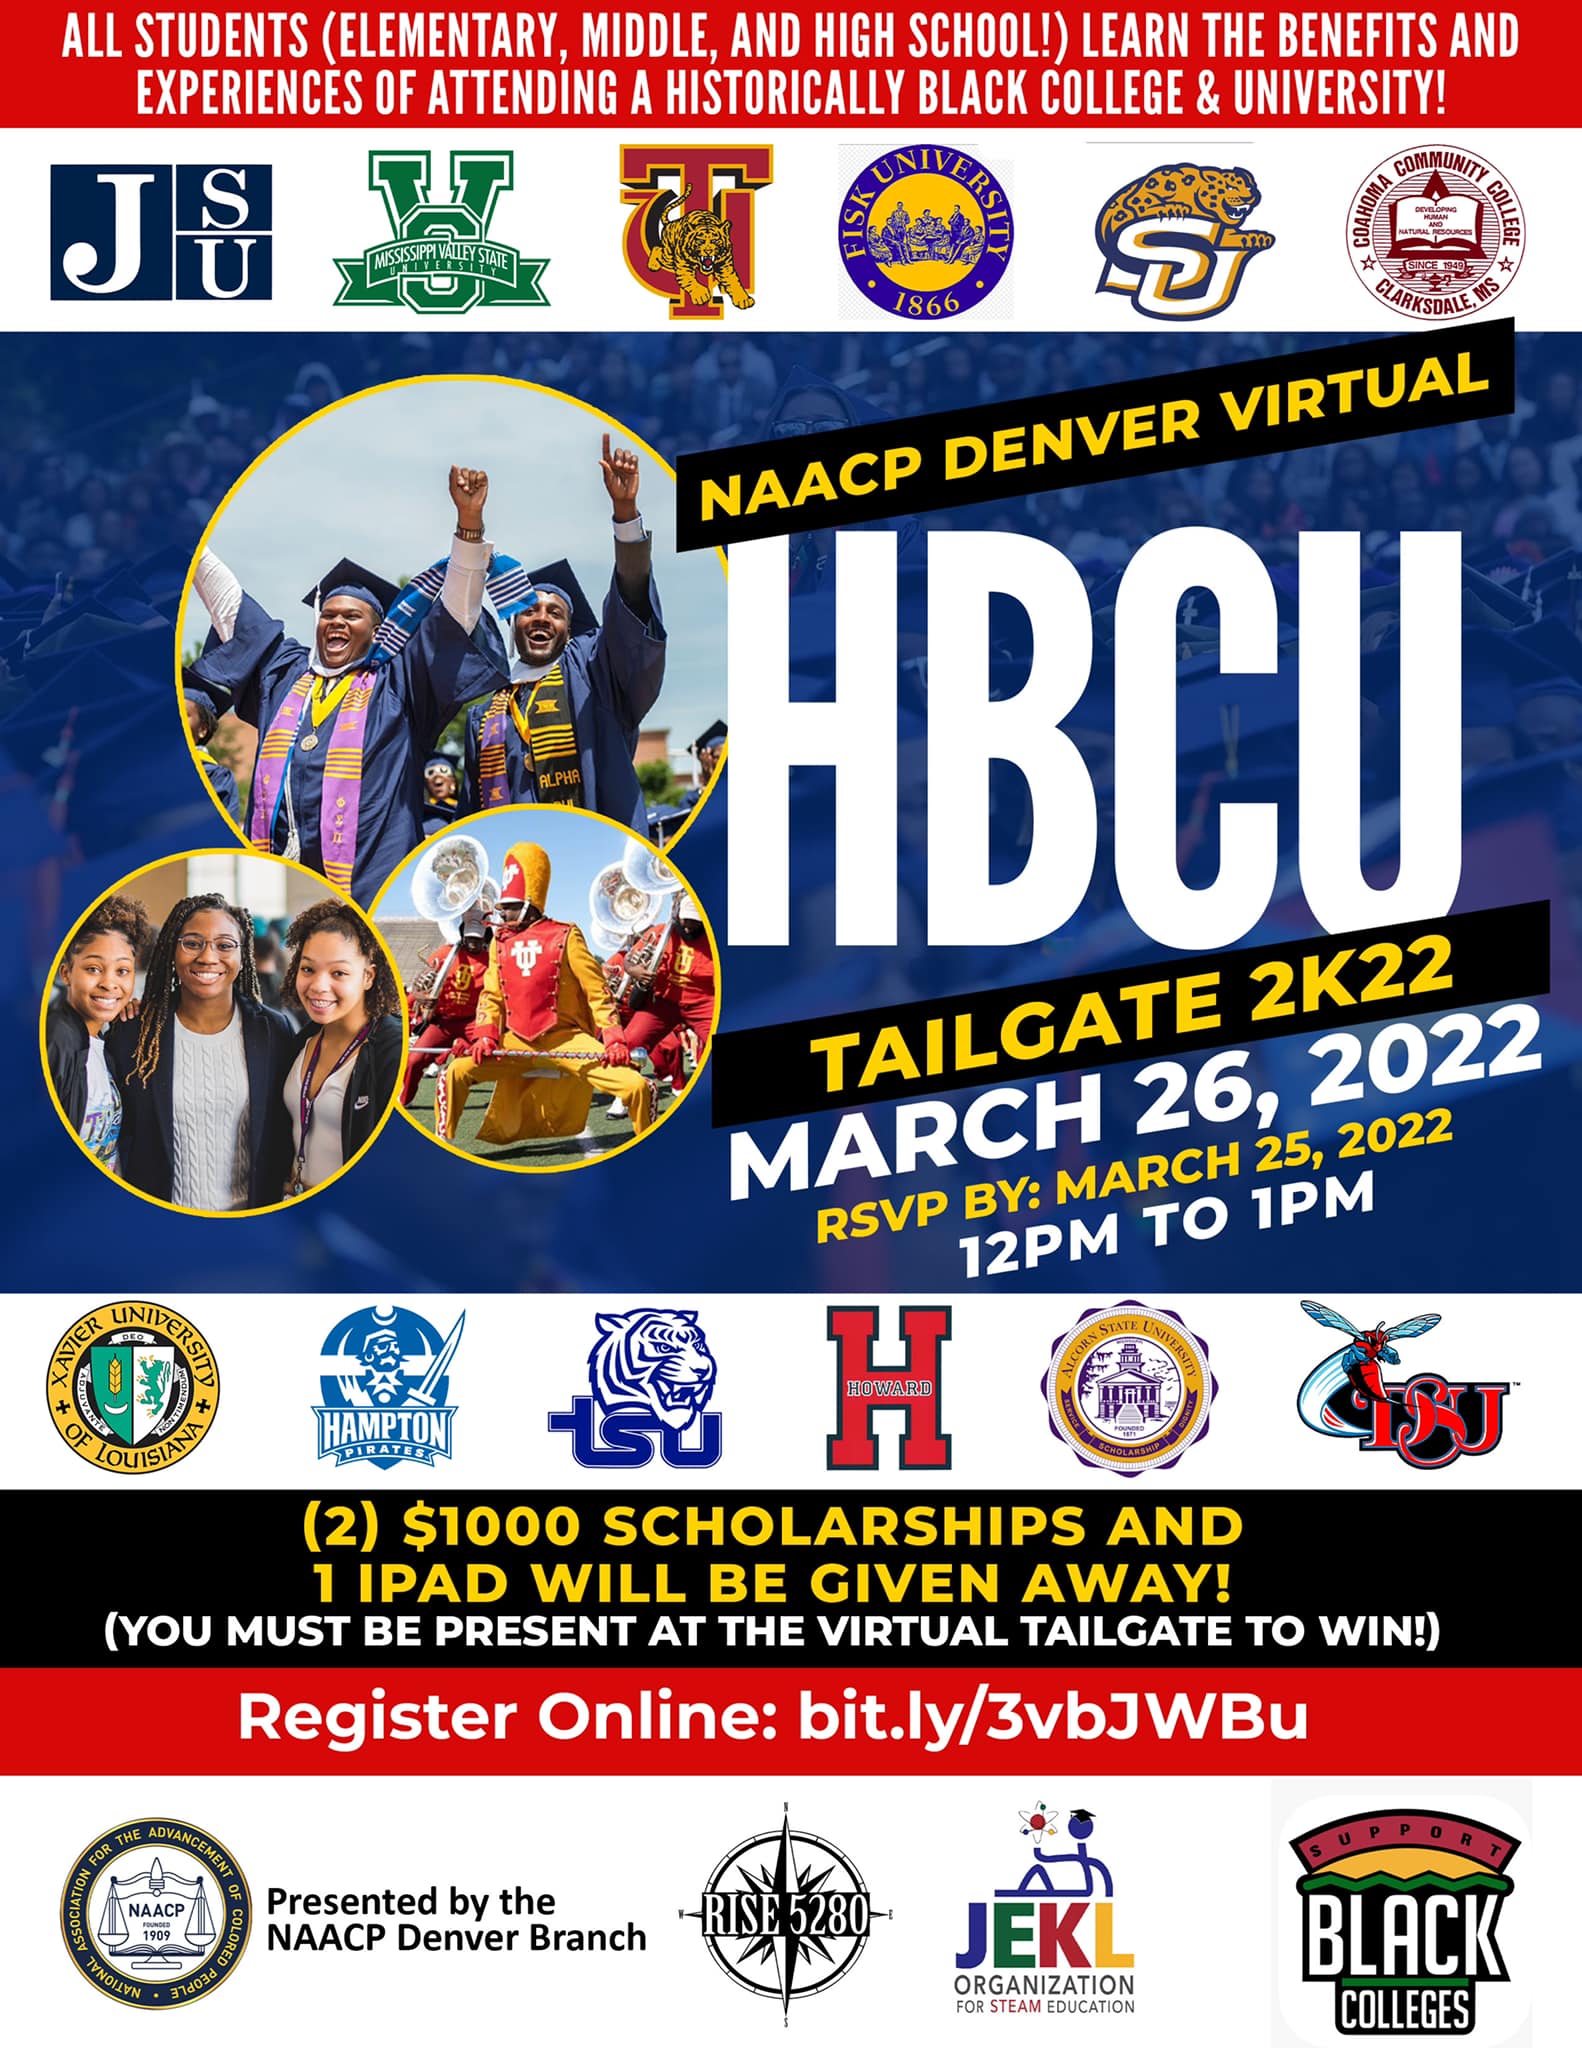 HBCU Tail Gate Education Committee